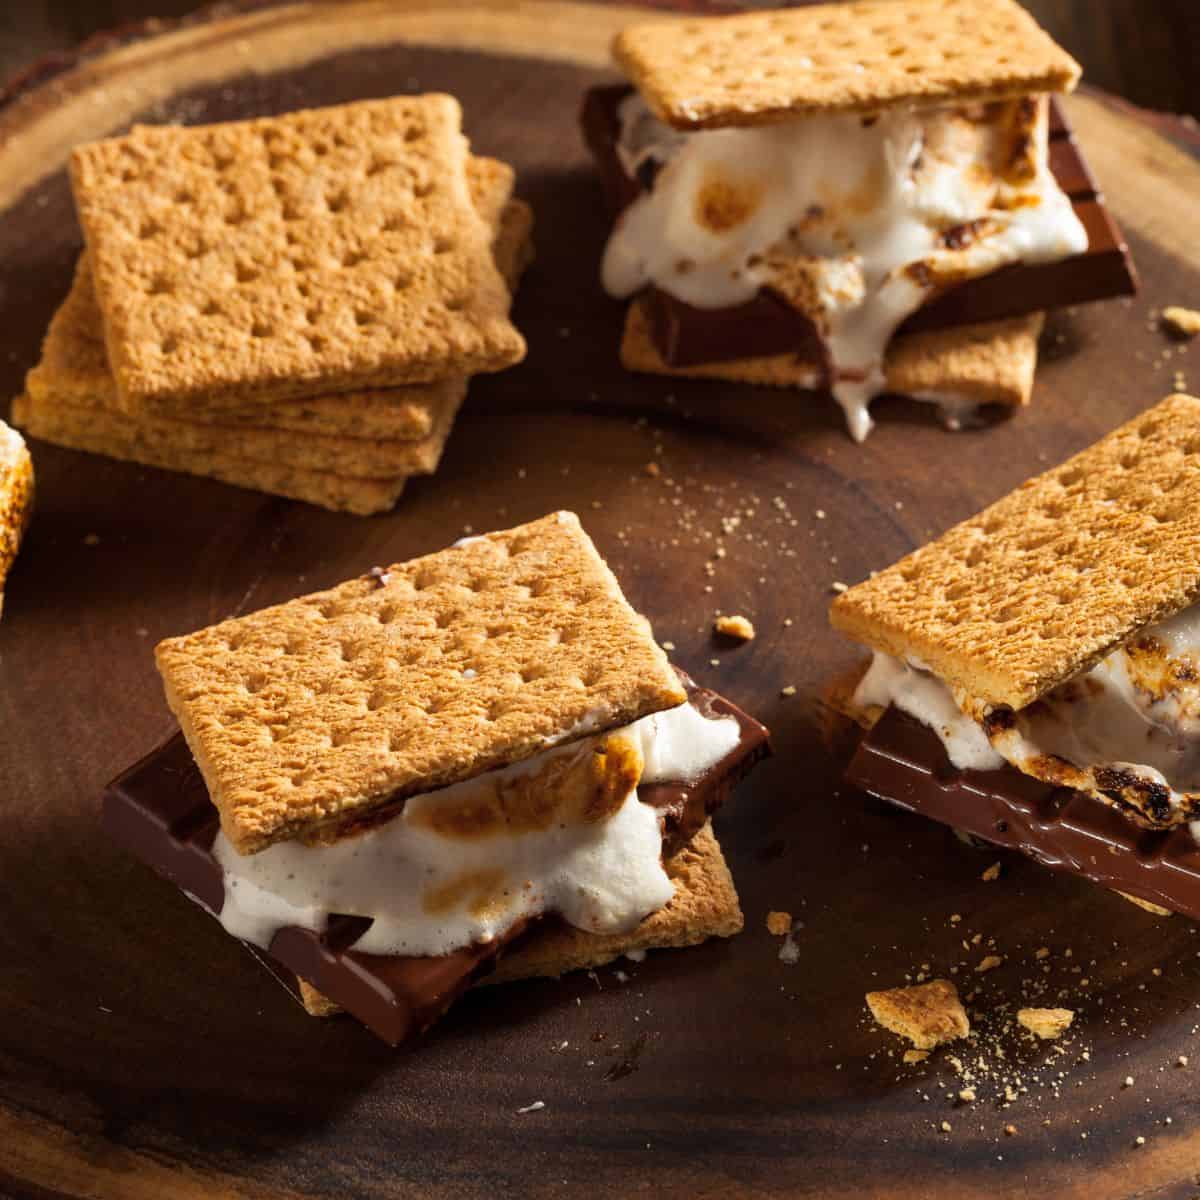 How to make a Campfire Charcuterie Board, Includes recipes for S'mores board,  S'mores stuffed campfire cones, and patriotic cones.